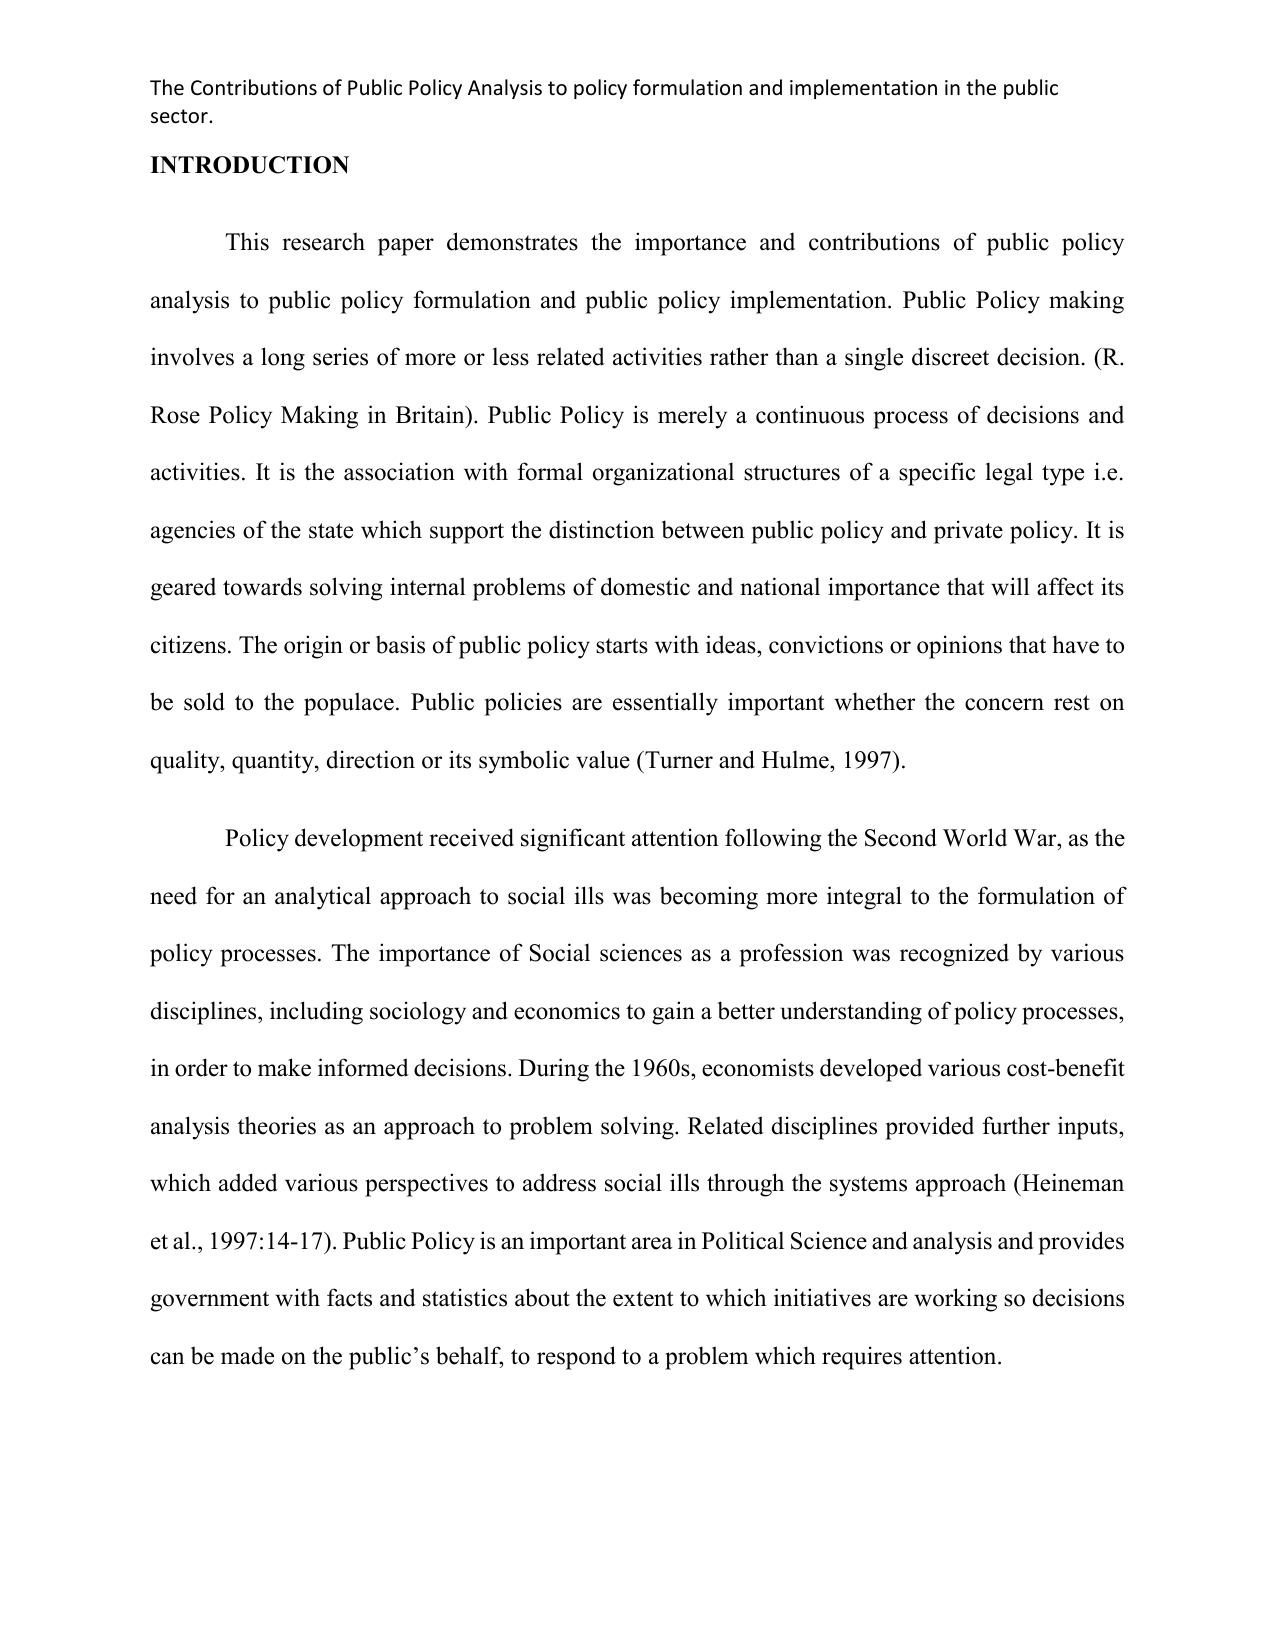 policy research working paper 3625